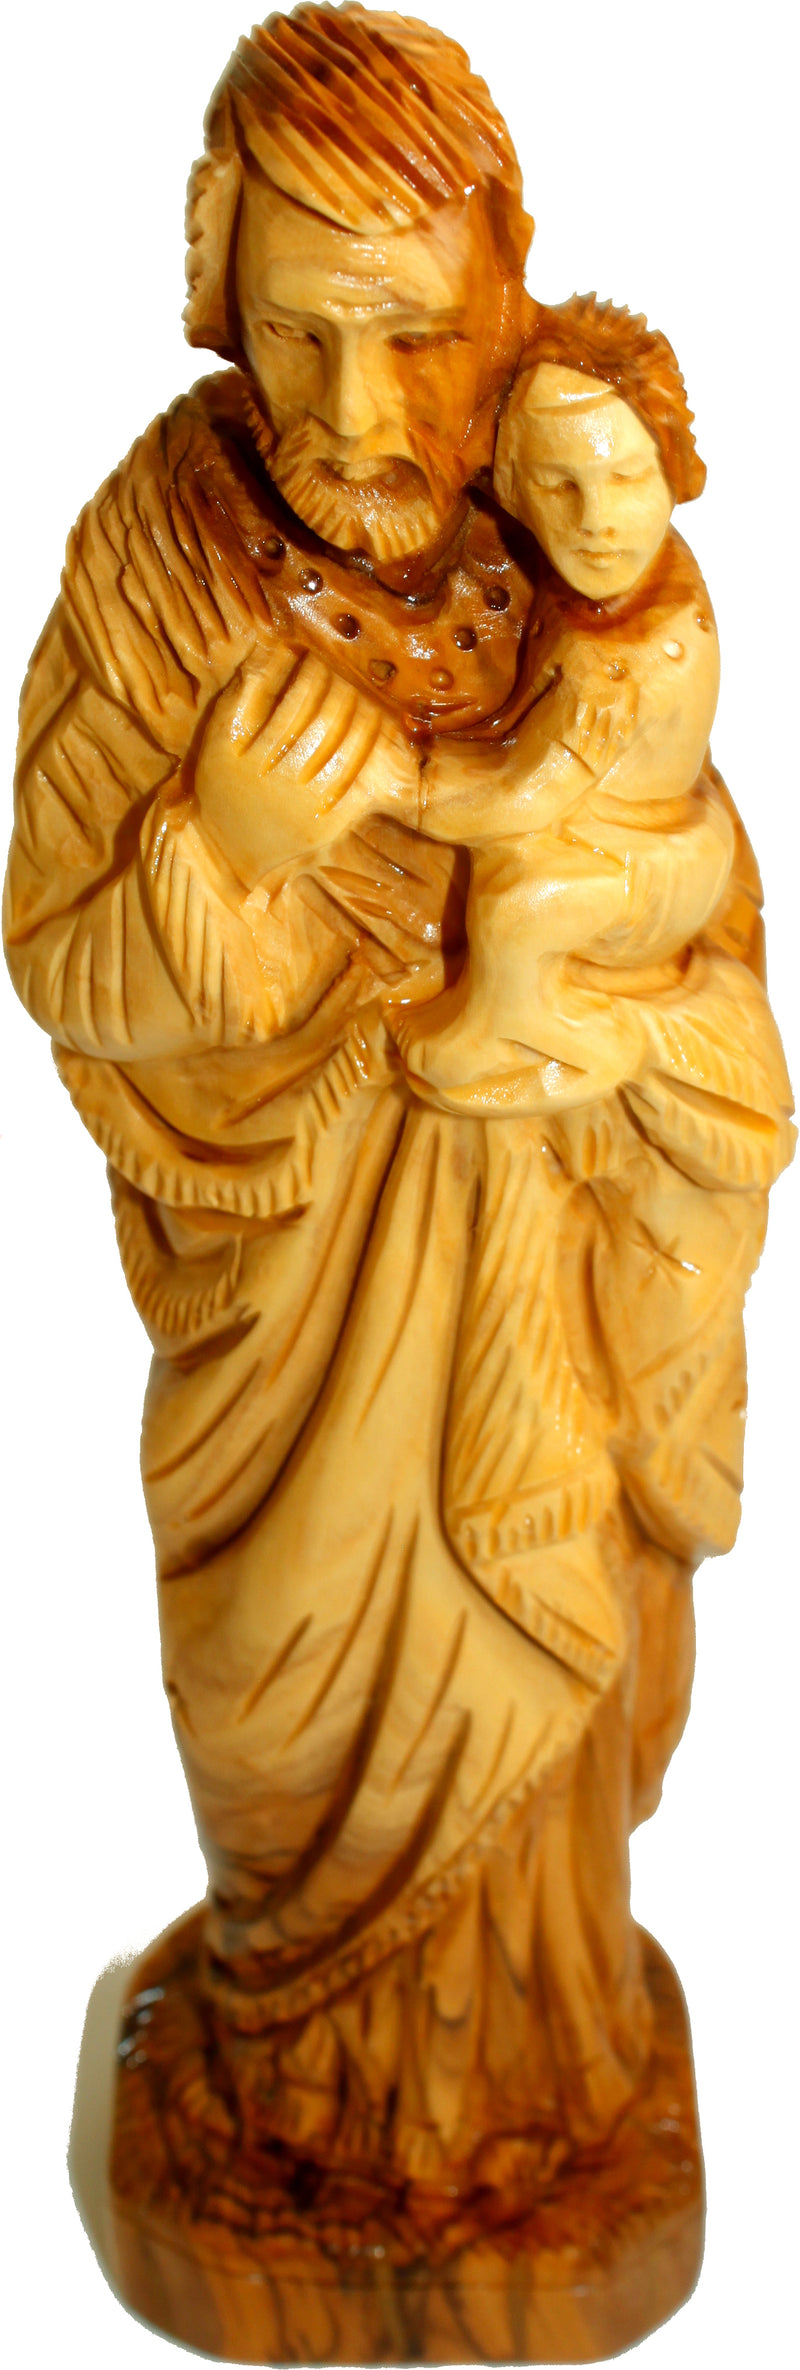 St. Joseph - Grade A Olive wood hand carved figure from Bethlehem (10.75 inches tall)